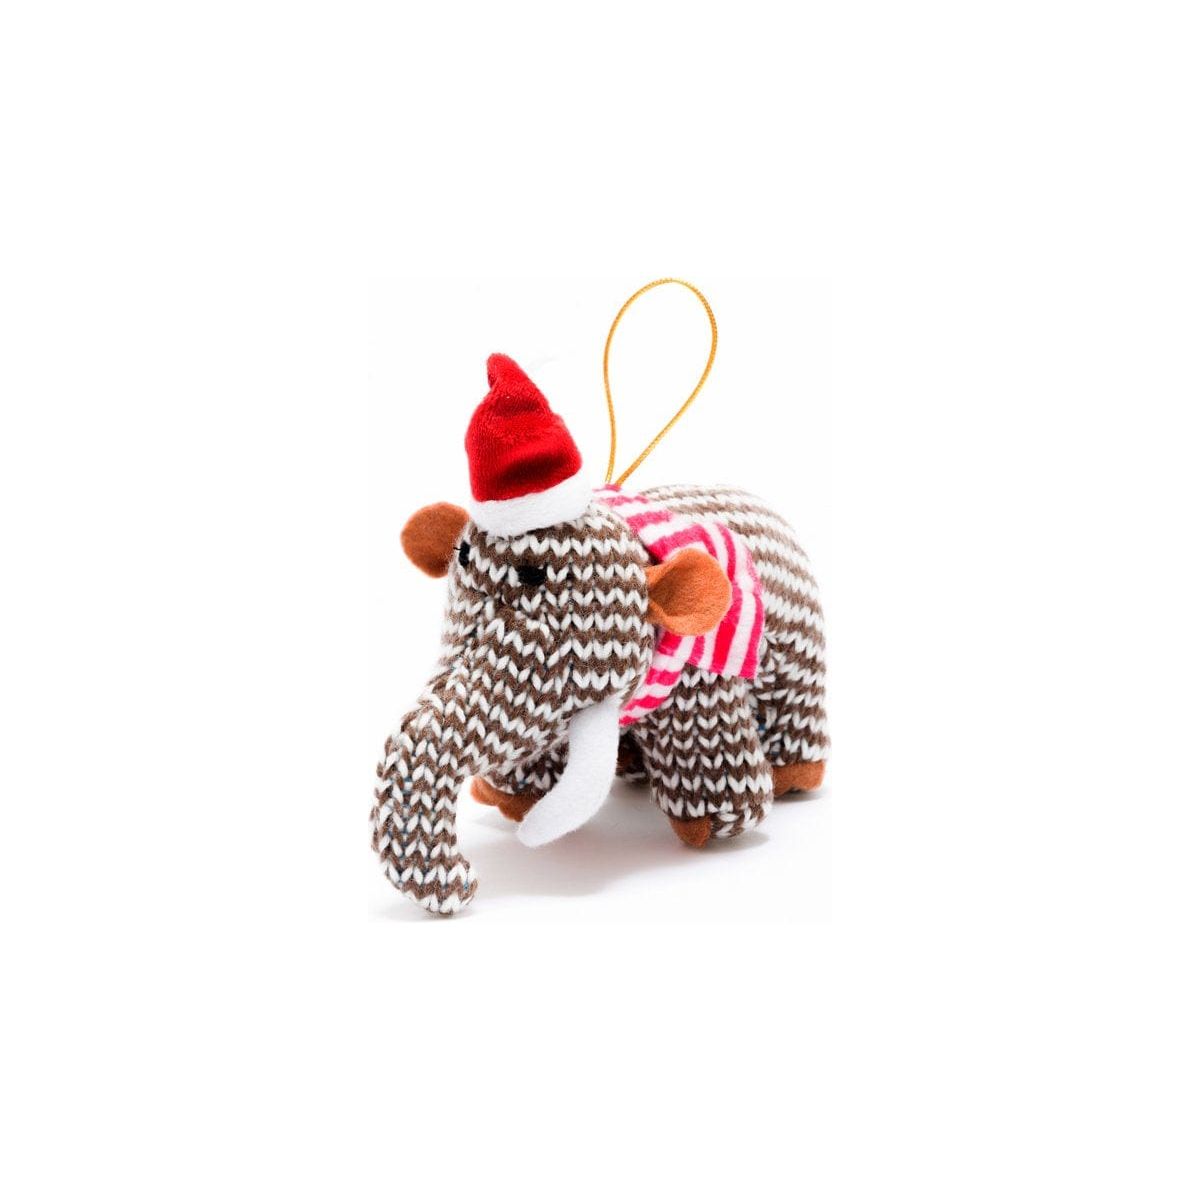 Best Years Ltd Knitted Woolly Mammoth Christmas Decoration